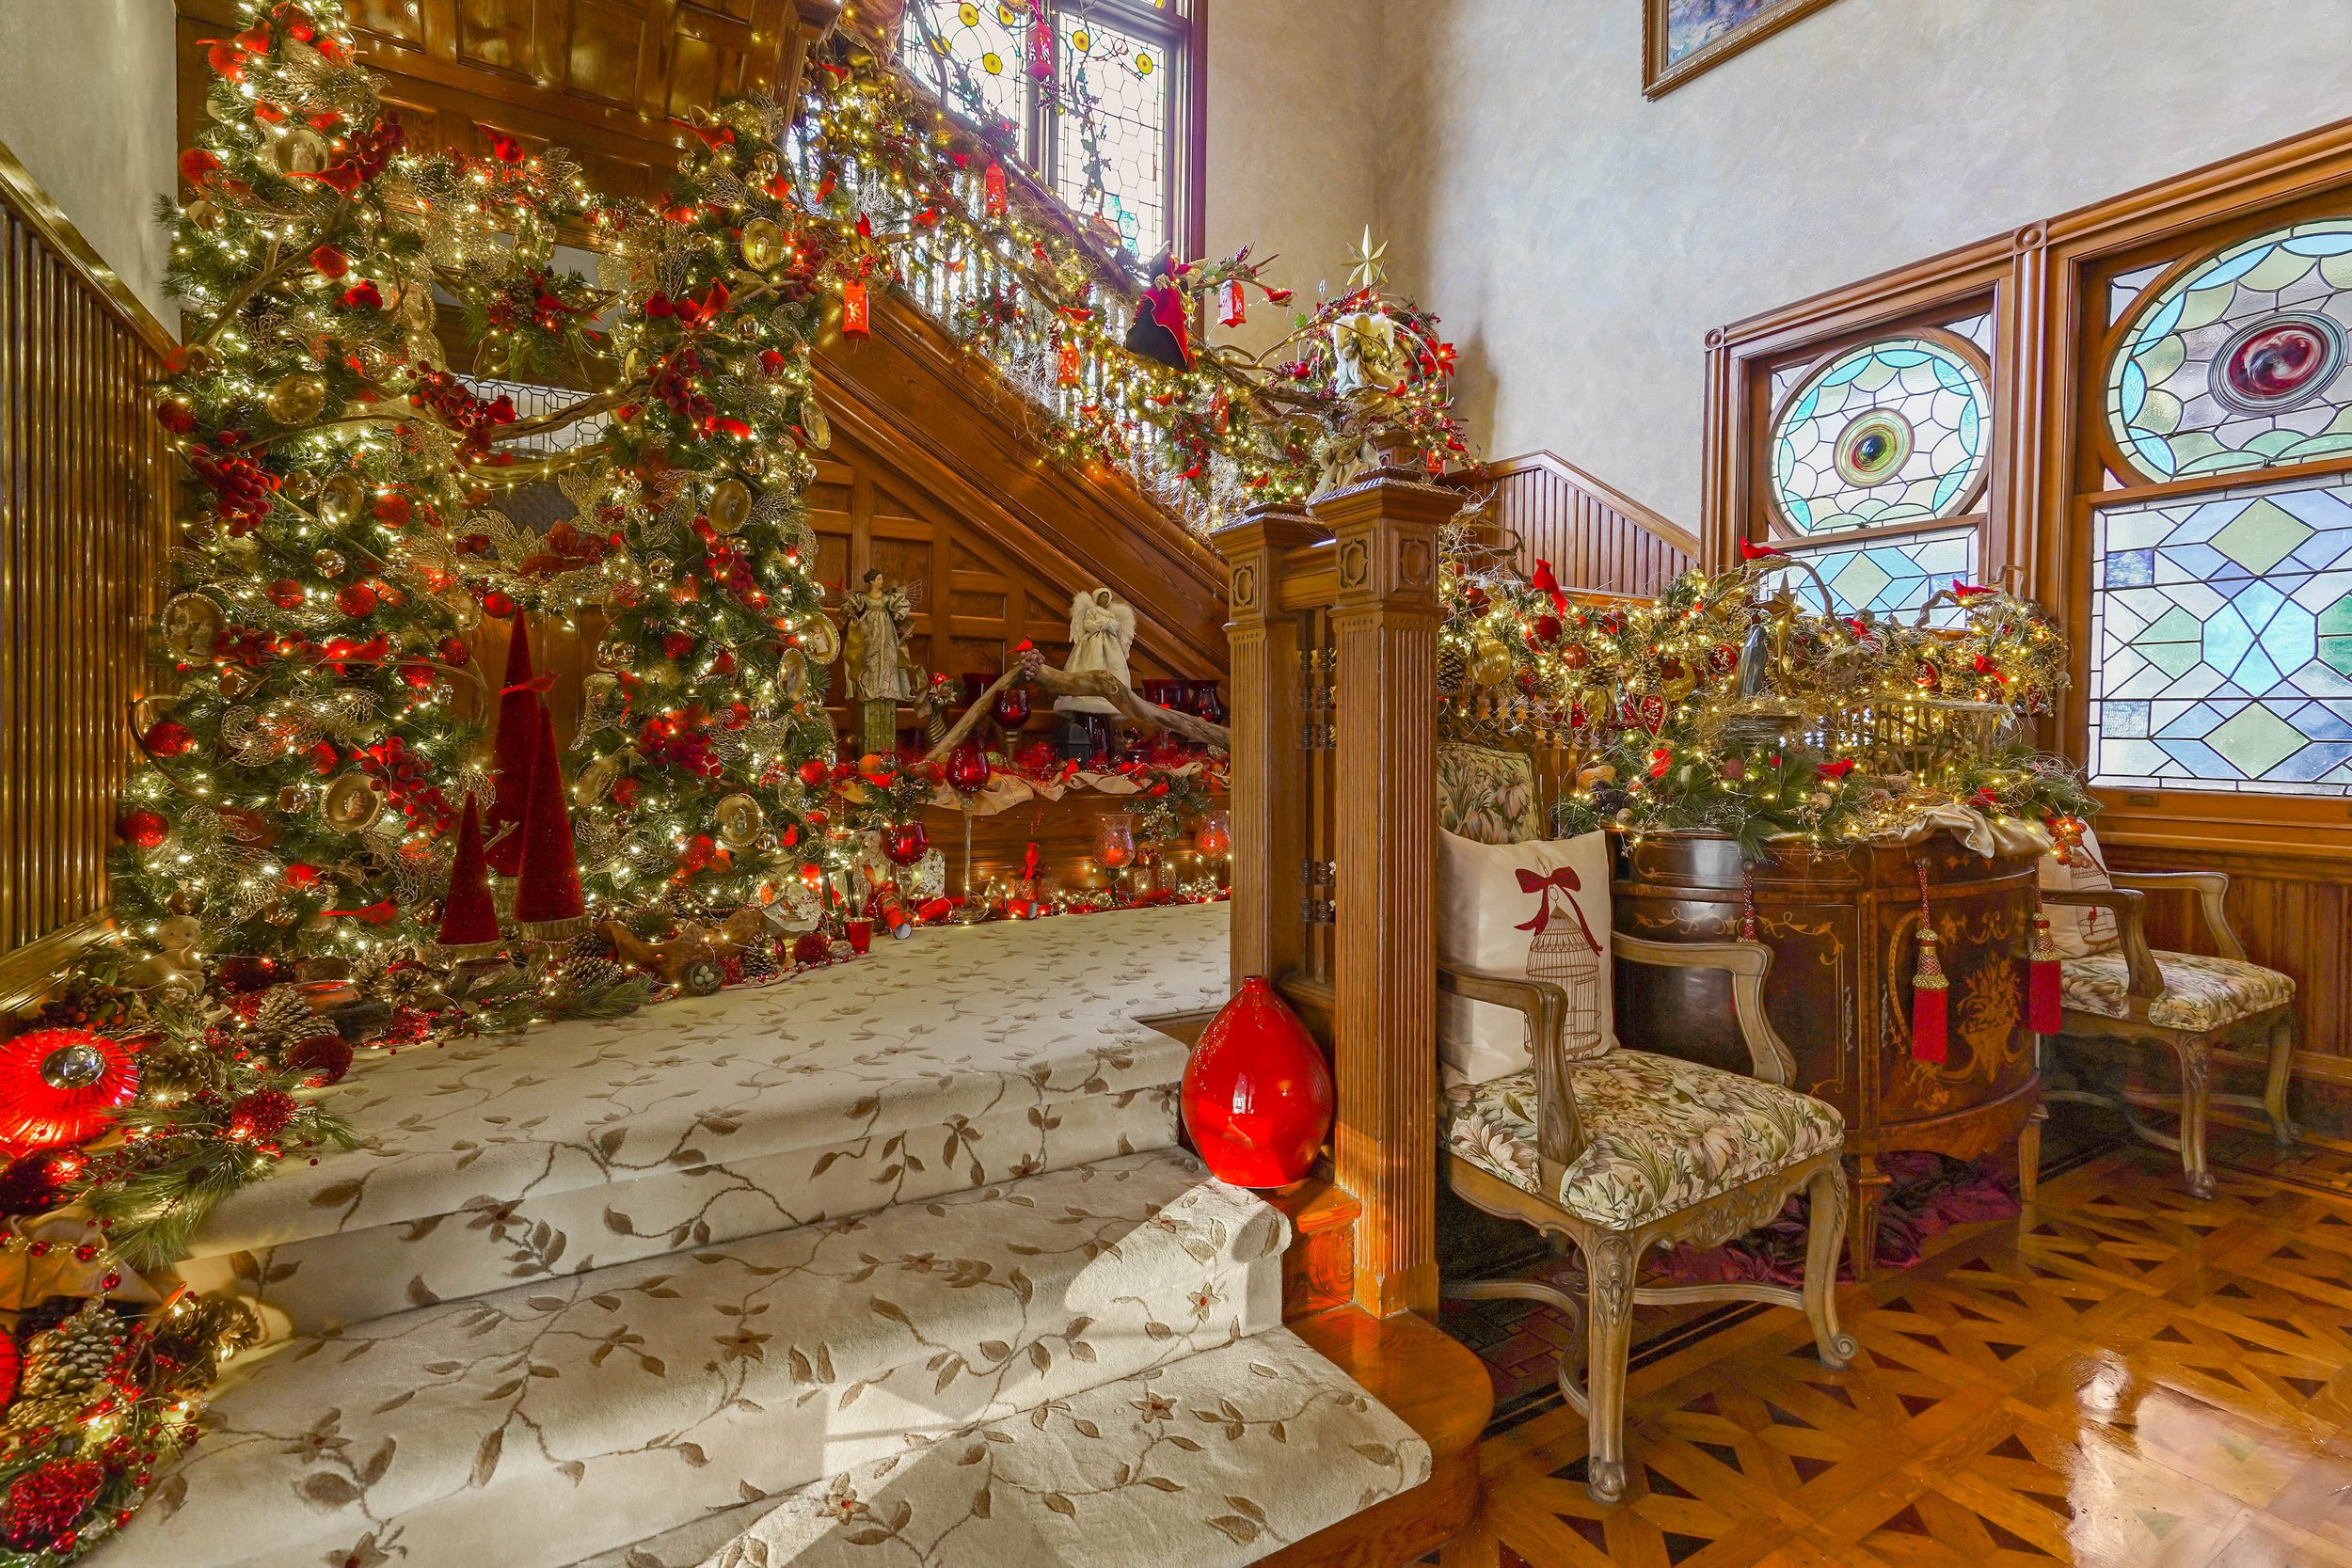 Best of show: Mueller House featured on annual Christmas tour